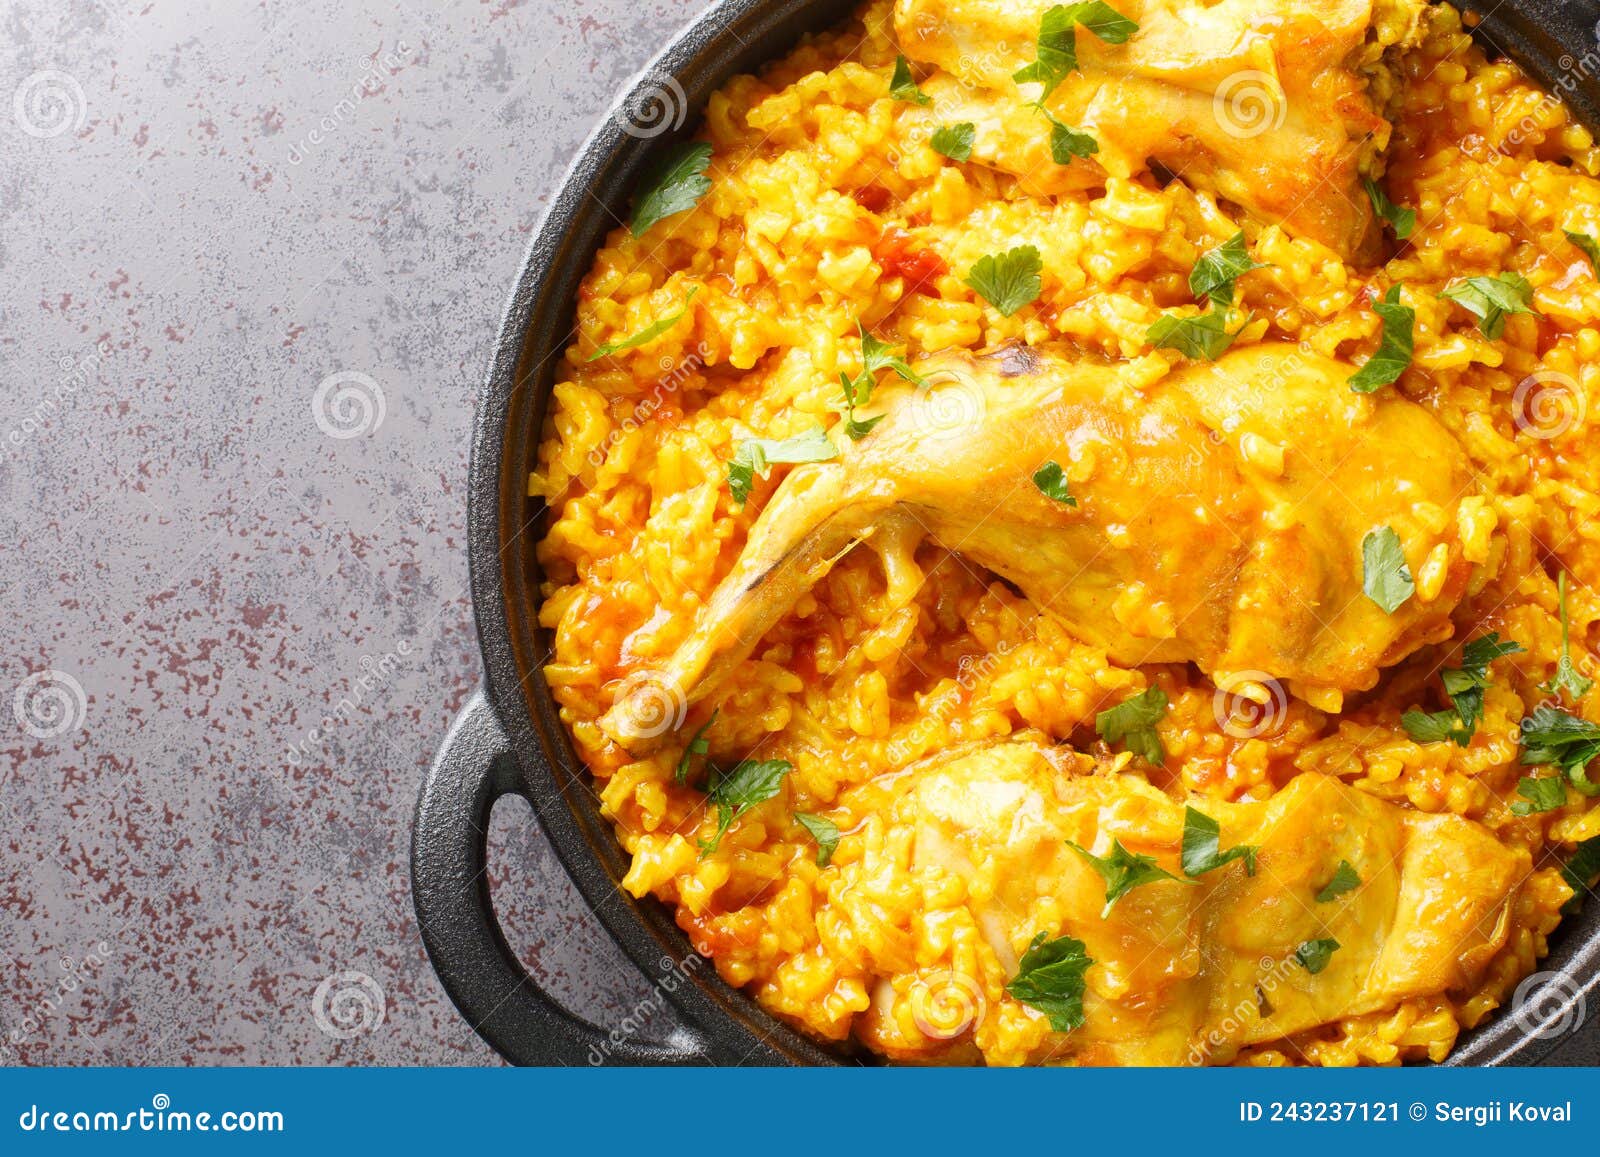 traditional spanish dish conejo con arroz that combines rice with rabbit meat closeup in the pan. horizontal top view